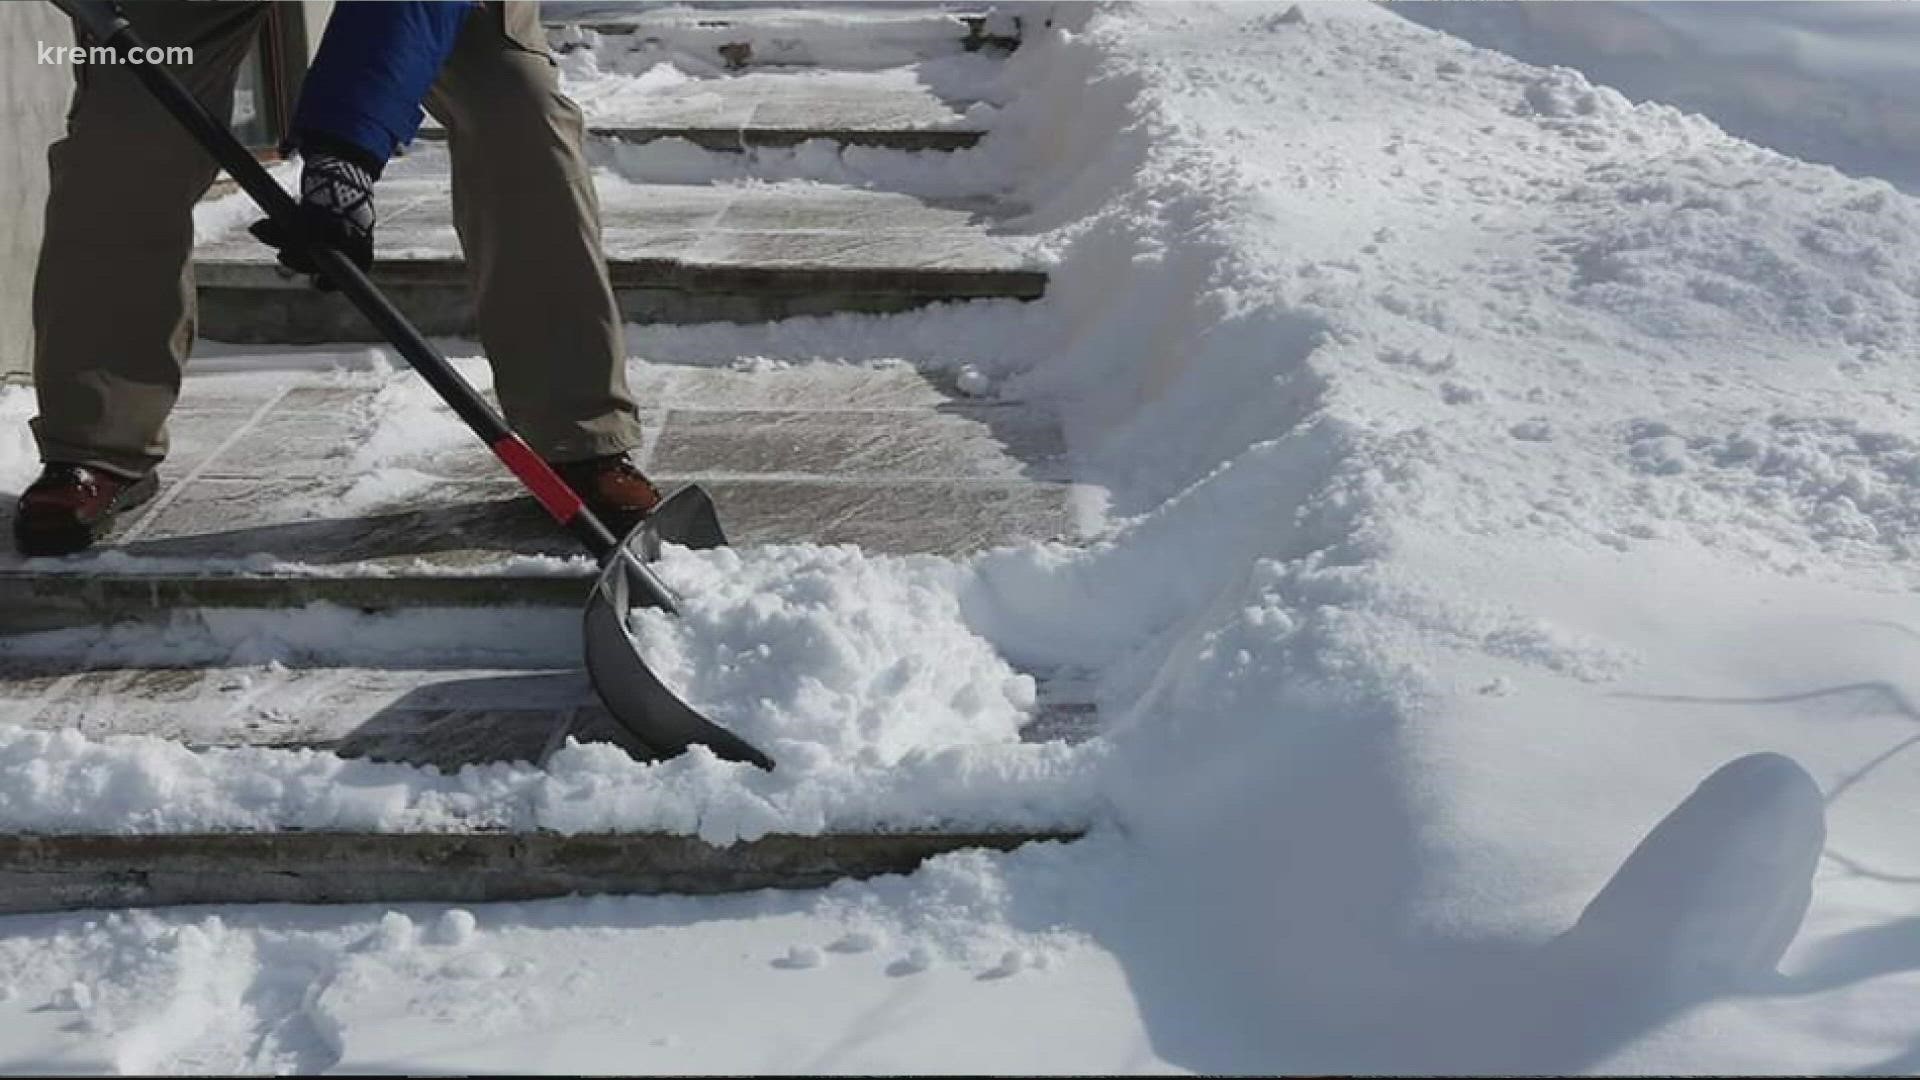 There is a Facebook group where people who can't shovel snow themselves, can ask the Snow Angels to clear their driveways and sidewalks for them.